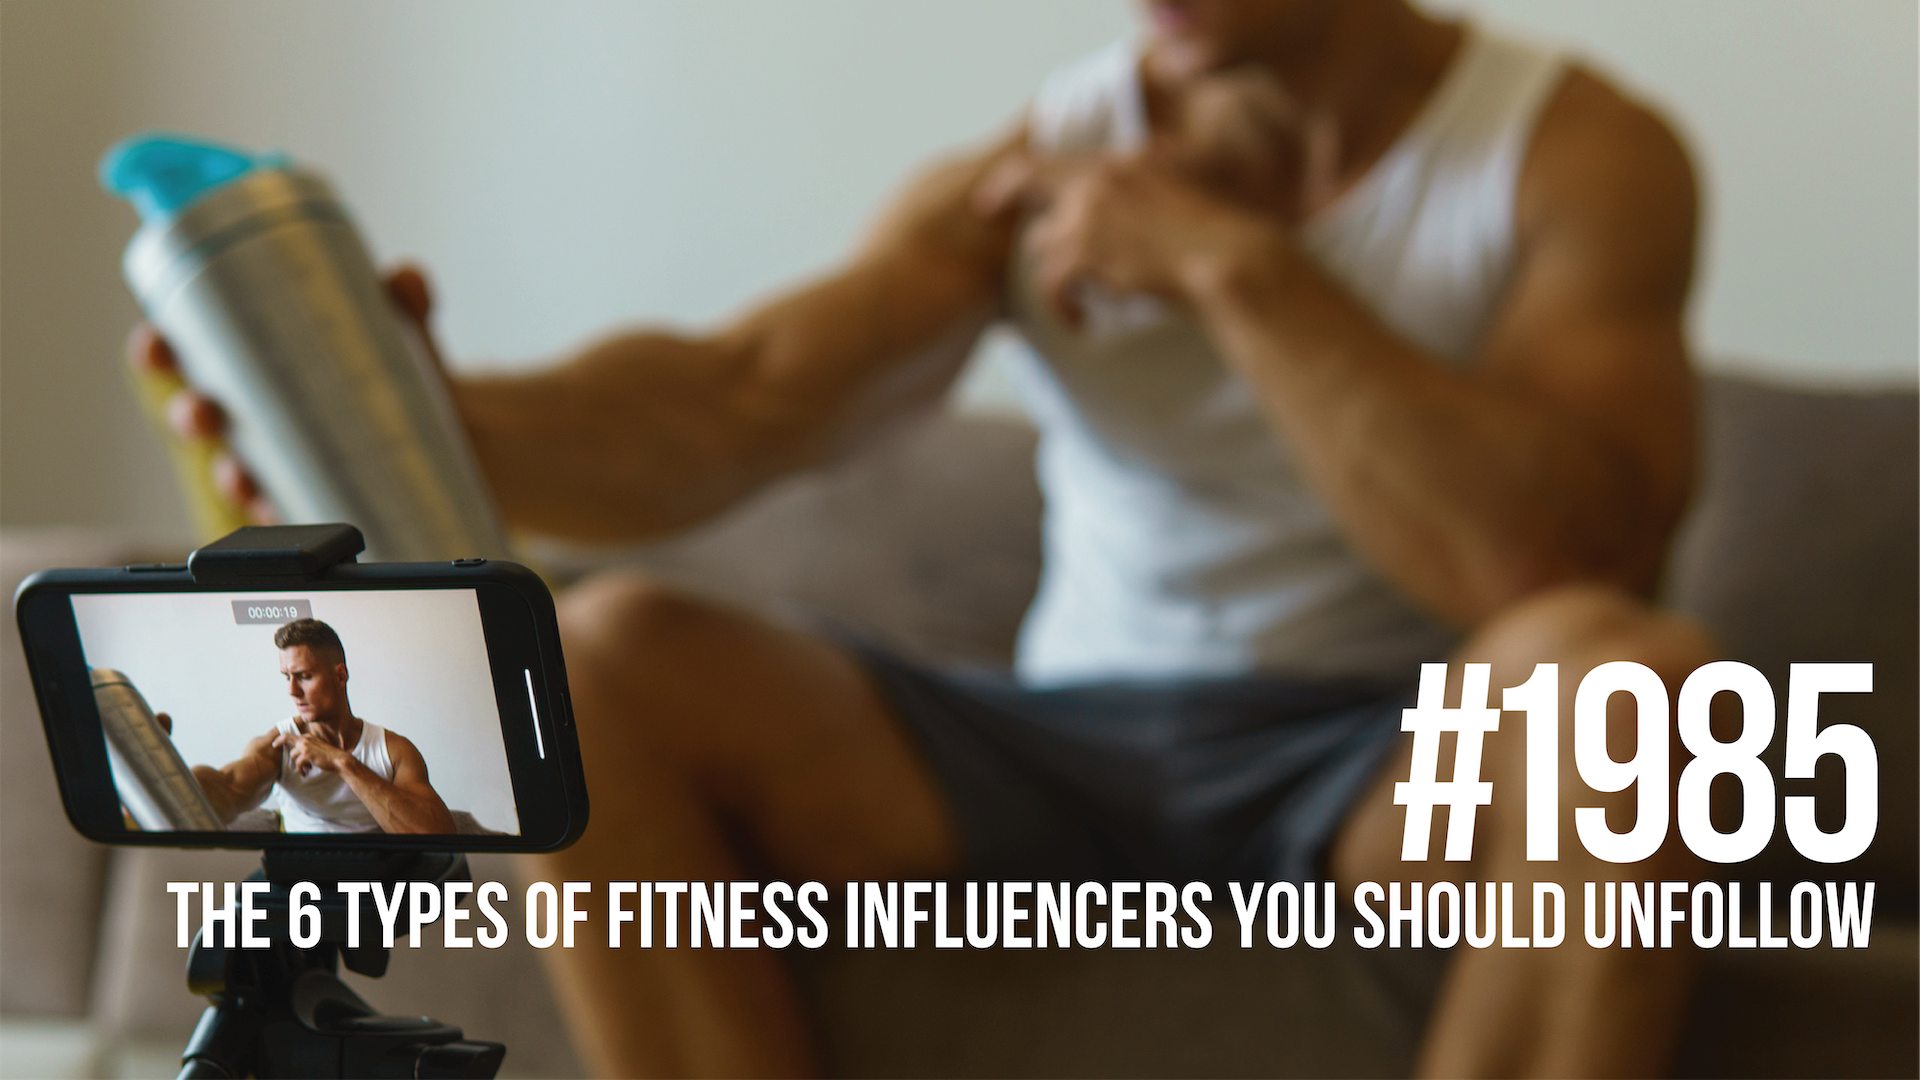 1985: The 6 Types of Fitness Influencers You Should Unfollow